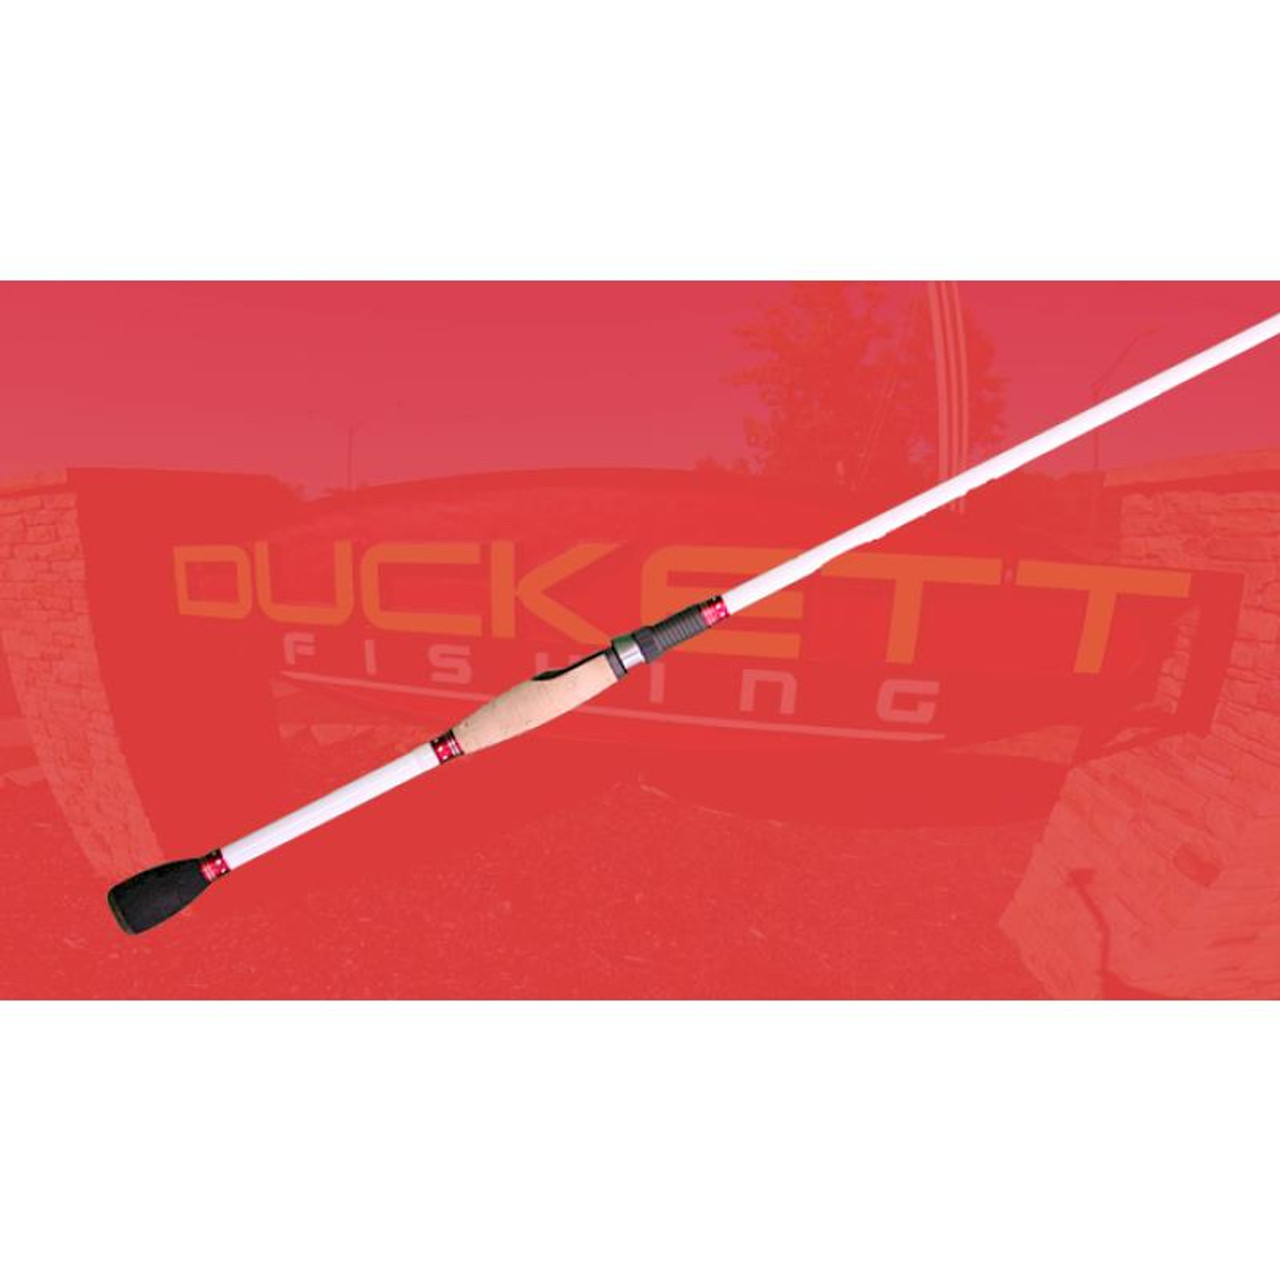 https://cdn11.bigcommerce.com/s-70mih4s/images/stencil/1280x1280/products/18099/45314/Duckett-Fishing-Micro-Magic-Pro-Spinning-Rod-858238005300_image1__82463.1577749354.jpg?c=2